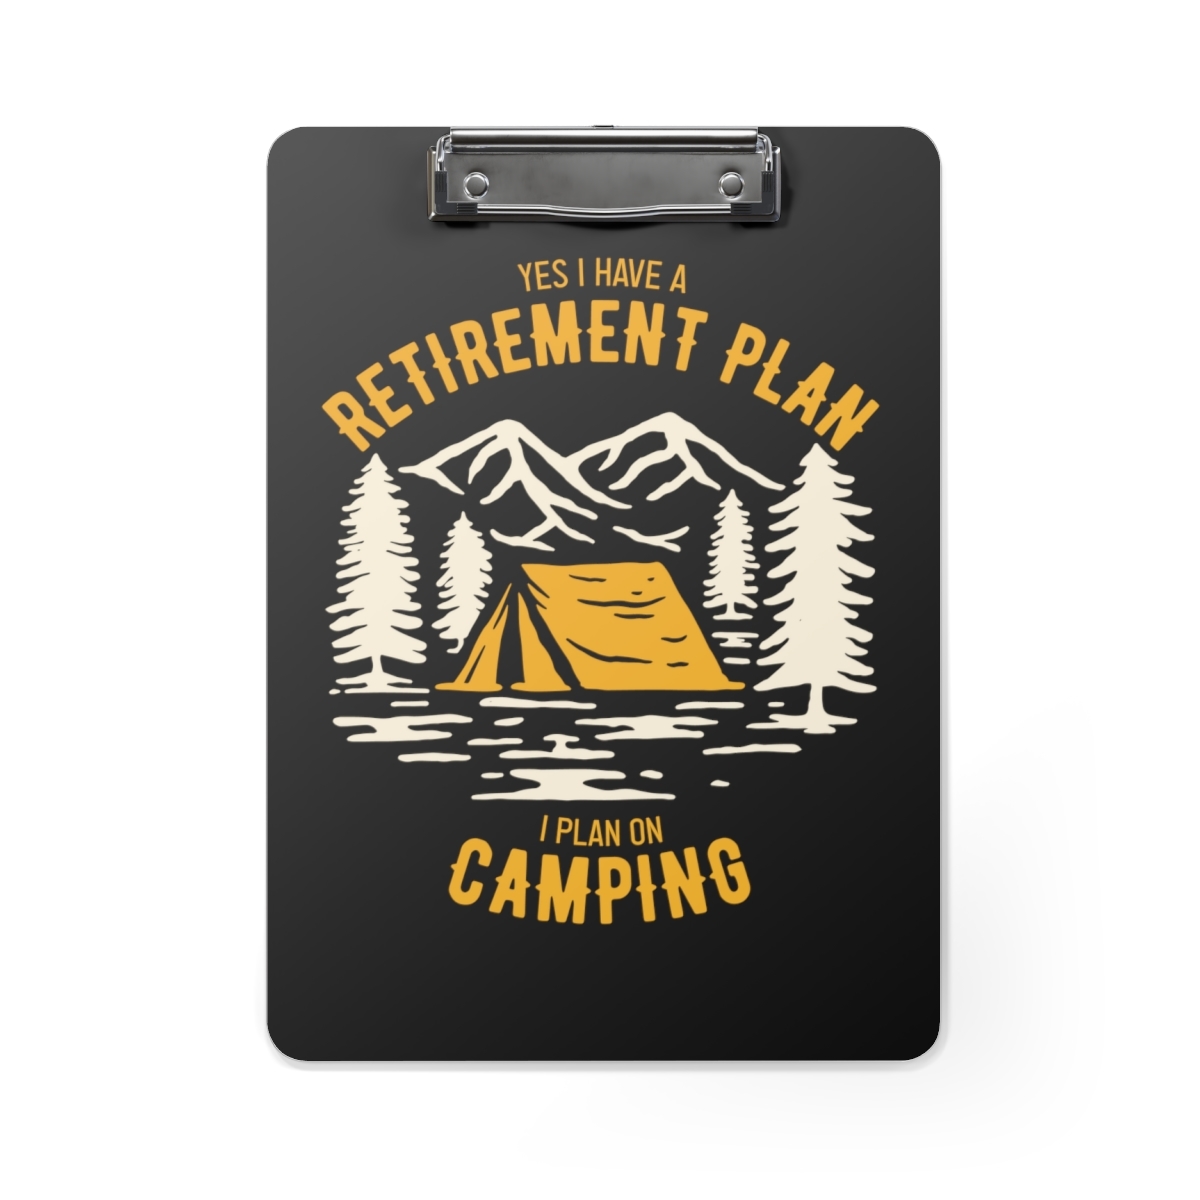 Primary image for Personalized Camping Retirement Plan Clipboard 9" x 12.5" Two-Sided Print Option